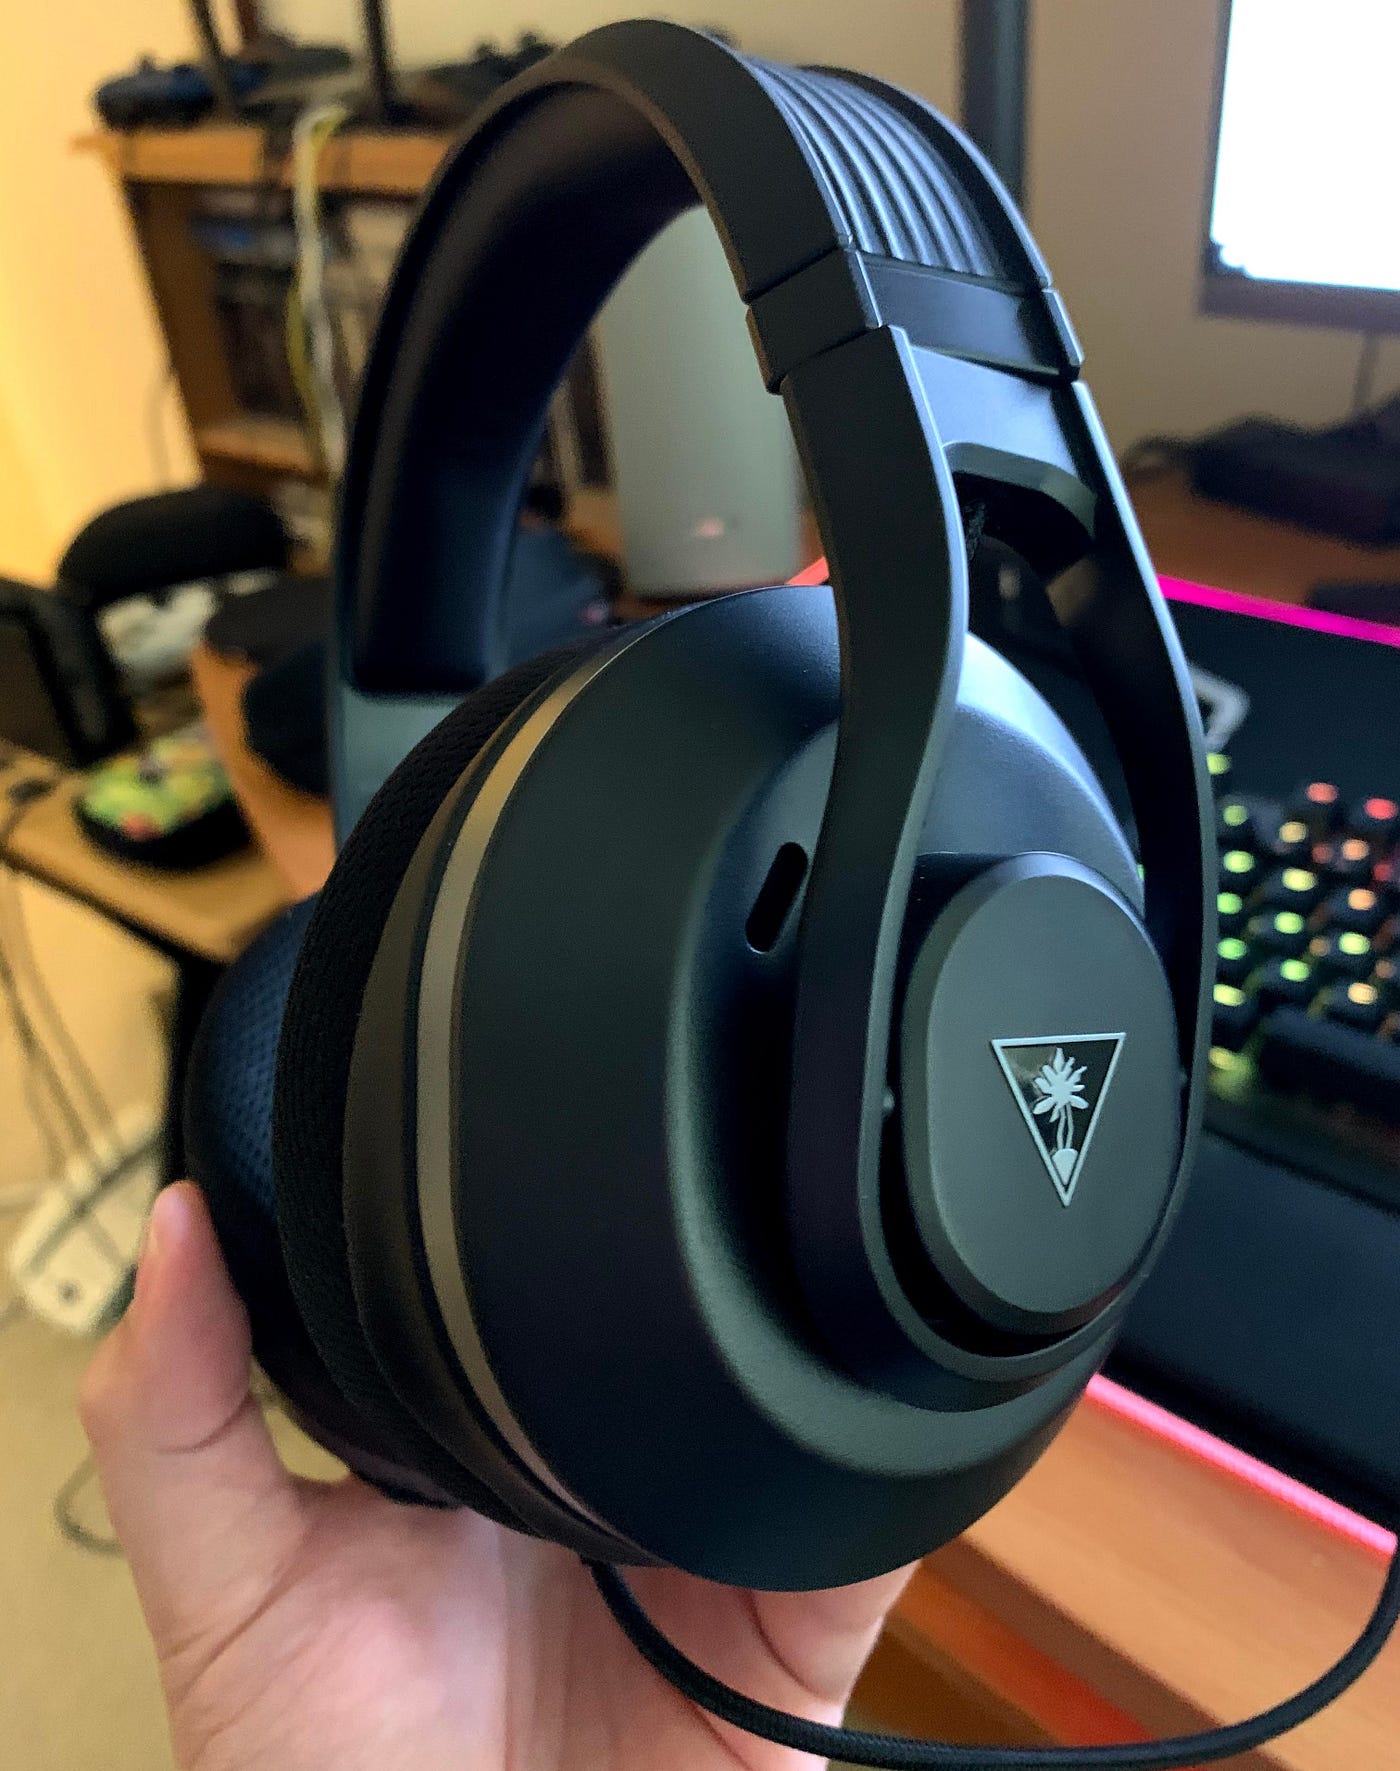 The Best New Gaming Headsets of 2021, by Alex Rowe